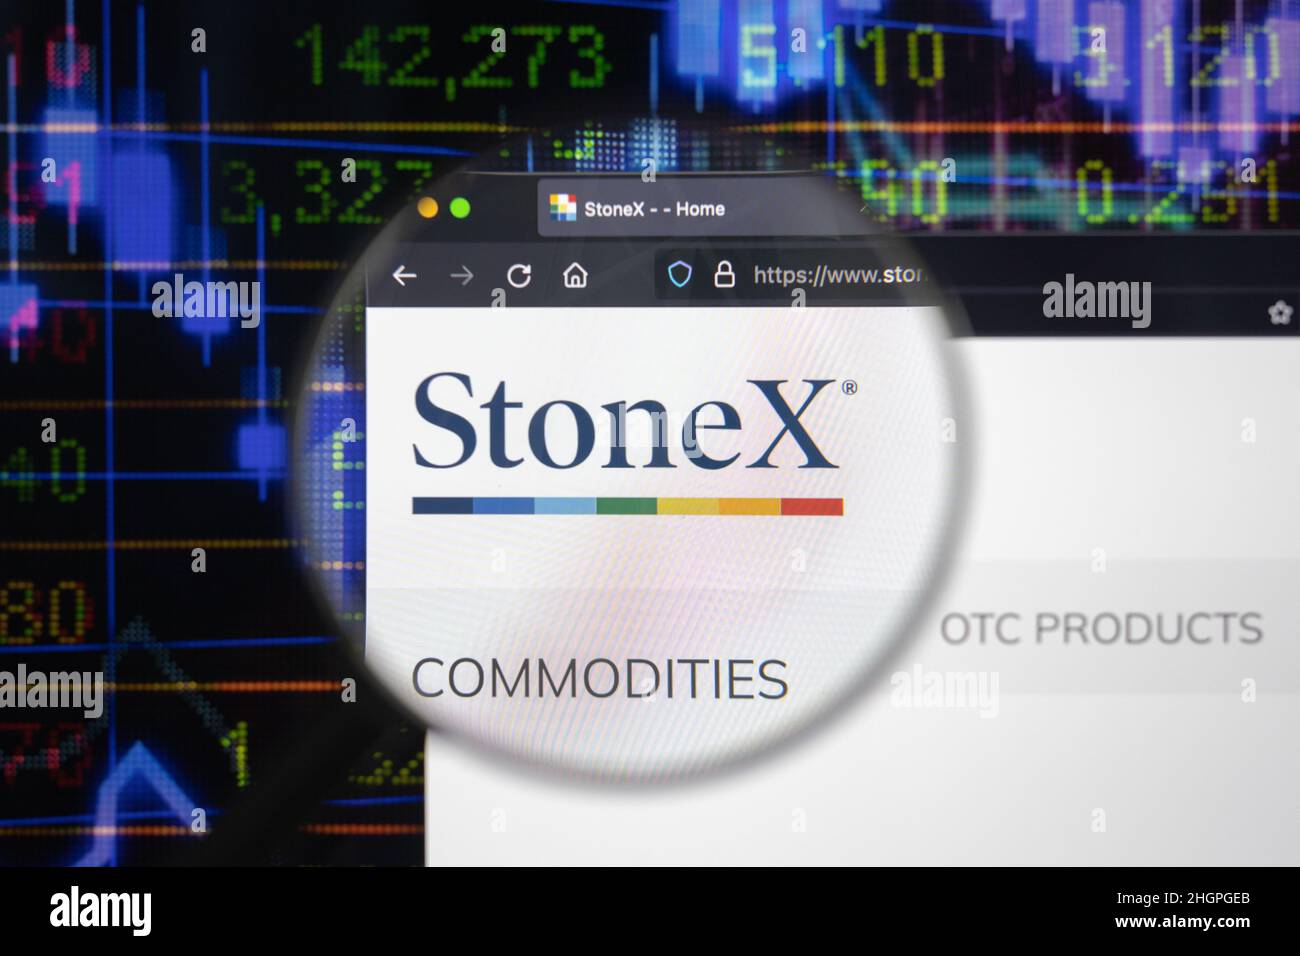 Stone x company logo on a website with blurry stock market developments in the background, seen on a computer screen through a magnifying glass. Stock Photo